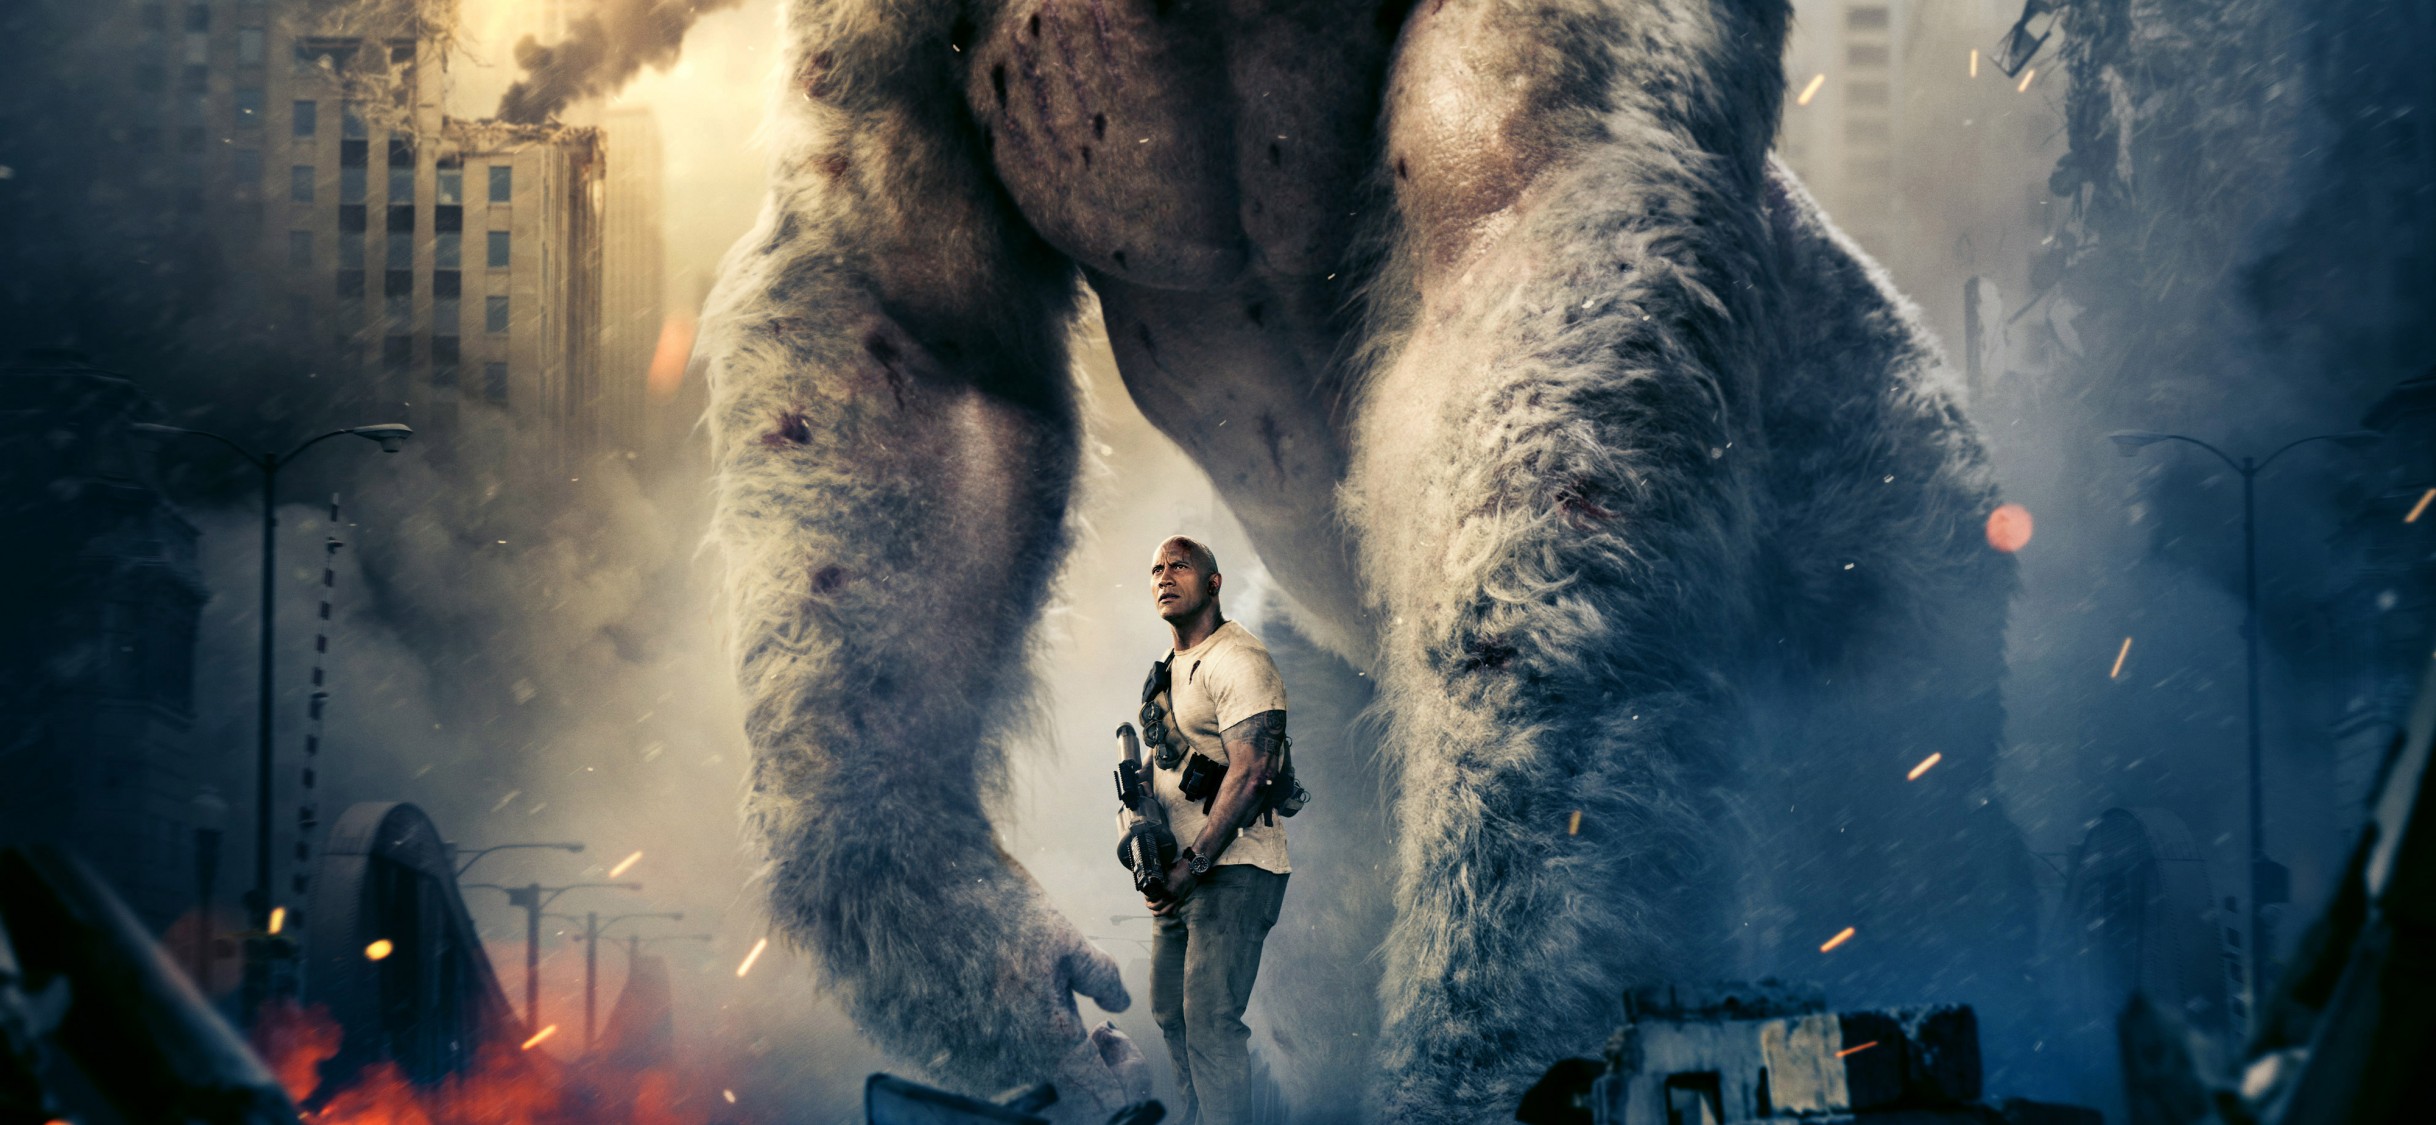 Download Rampage 2018 FUll Hd Wallpaper for Desktop and Mobiles